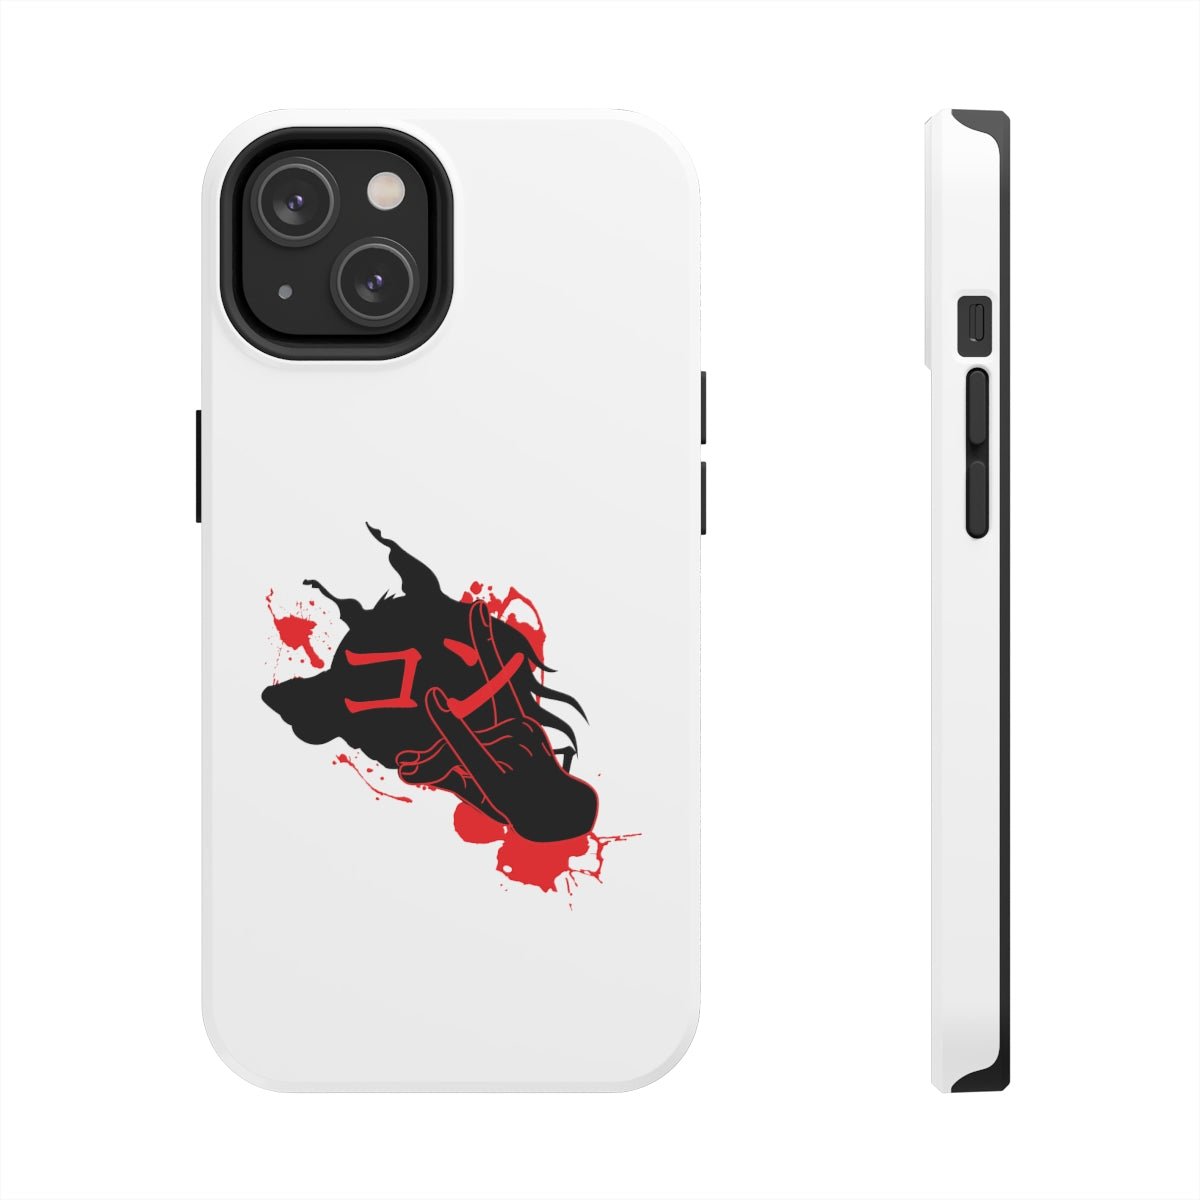 100 Anime Phone Cases  iPhone Samsung Free Shipping